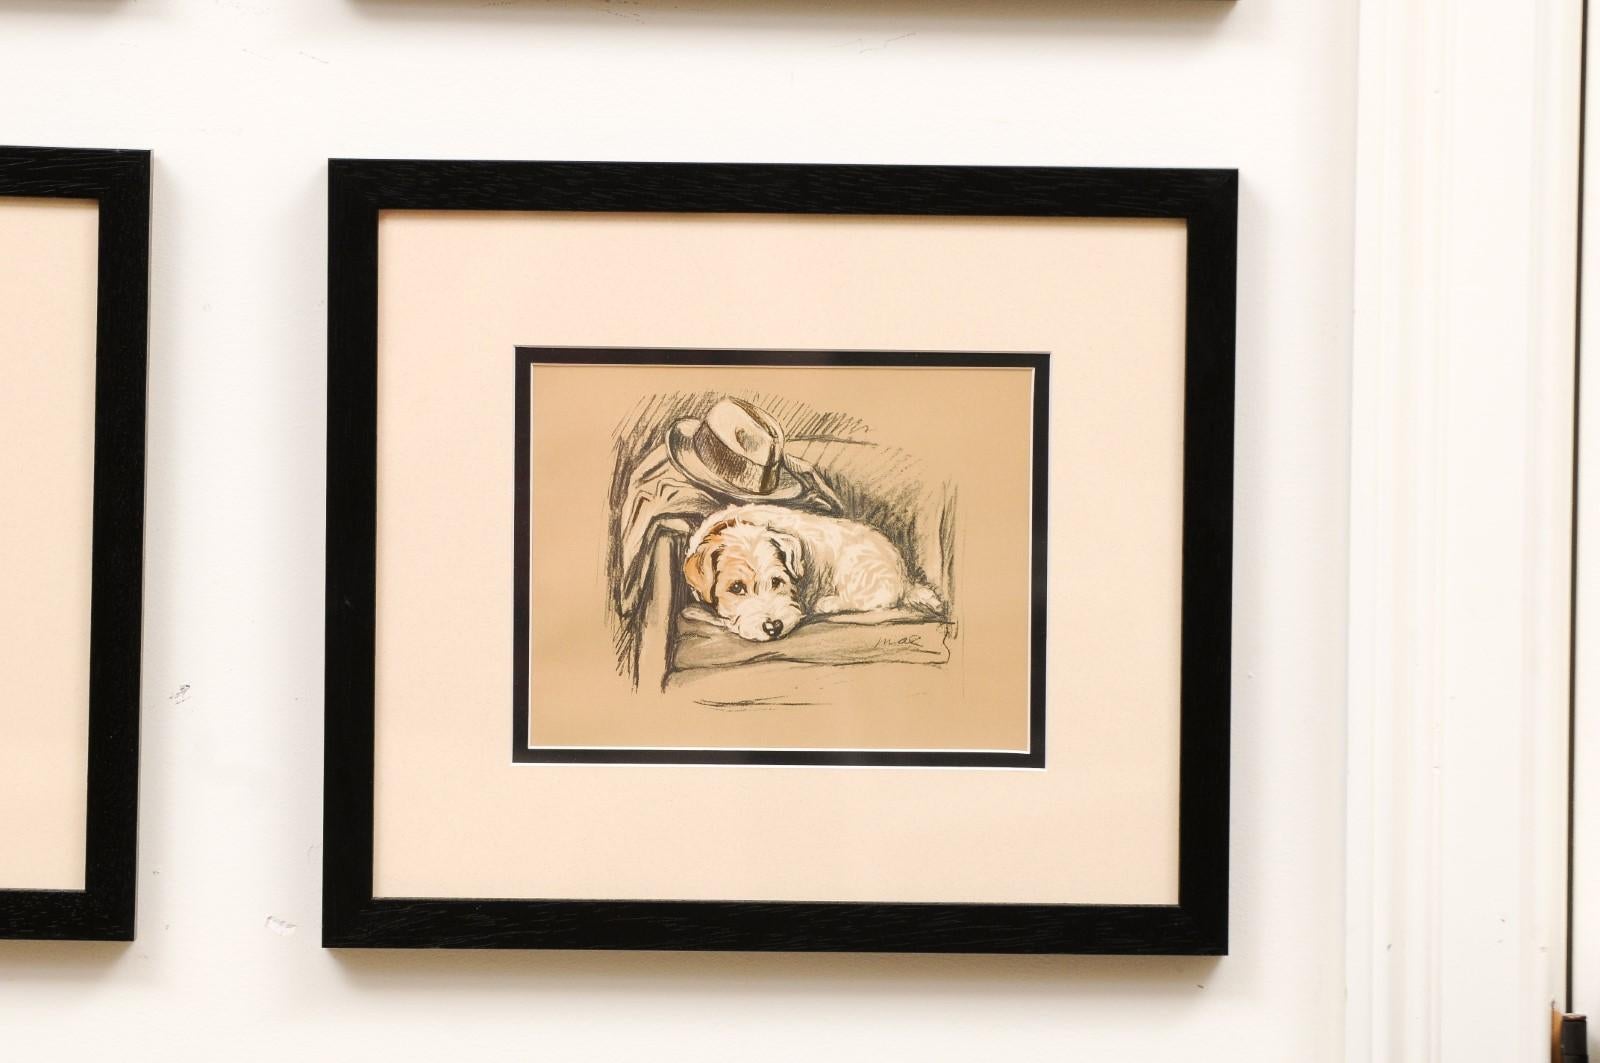 Set of 8 English Lucy Dawson Prints Depicting Dogs in Black Frames under Glass. 2